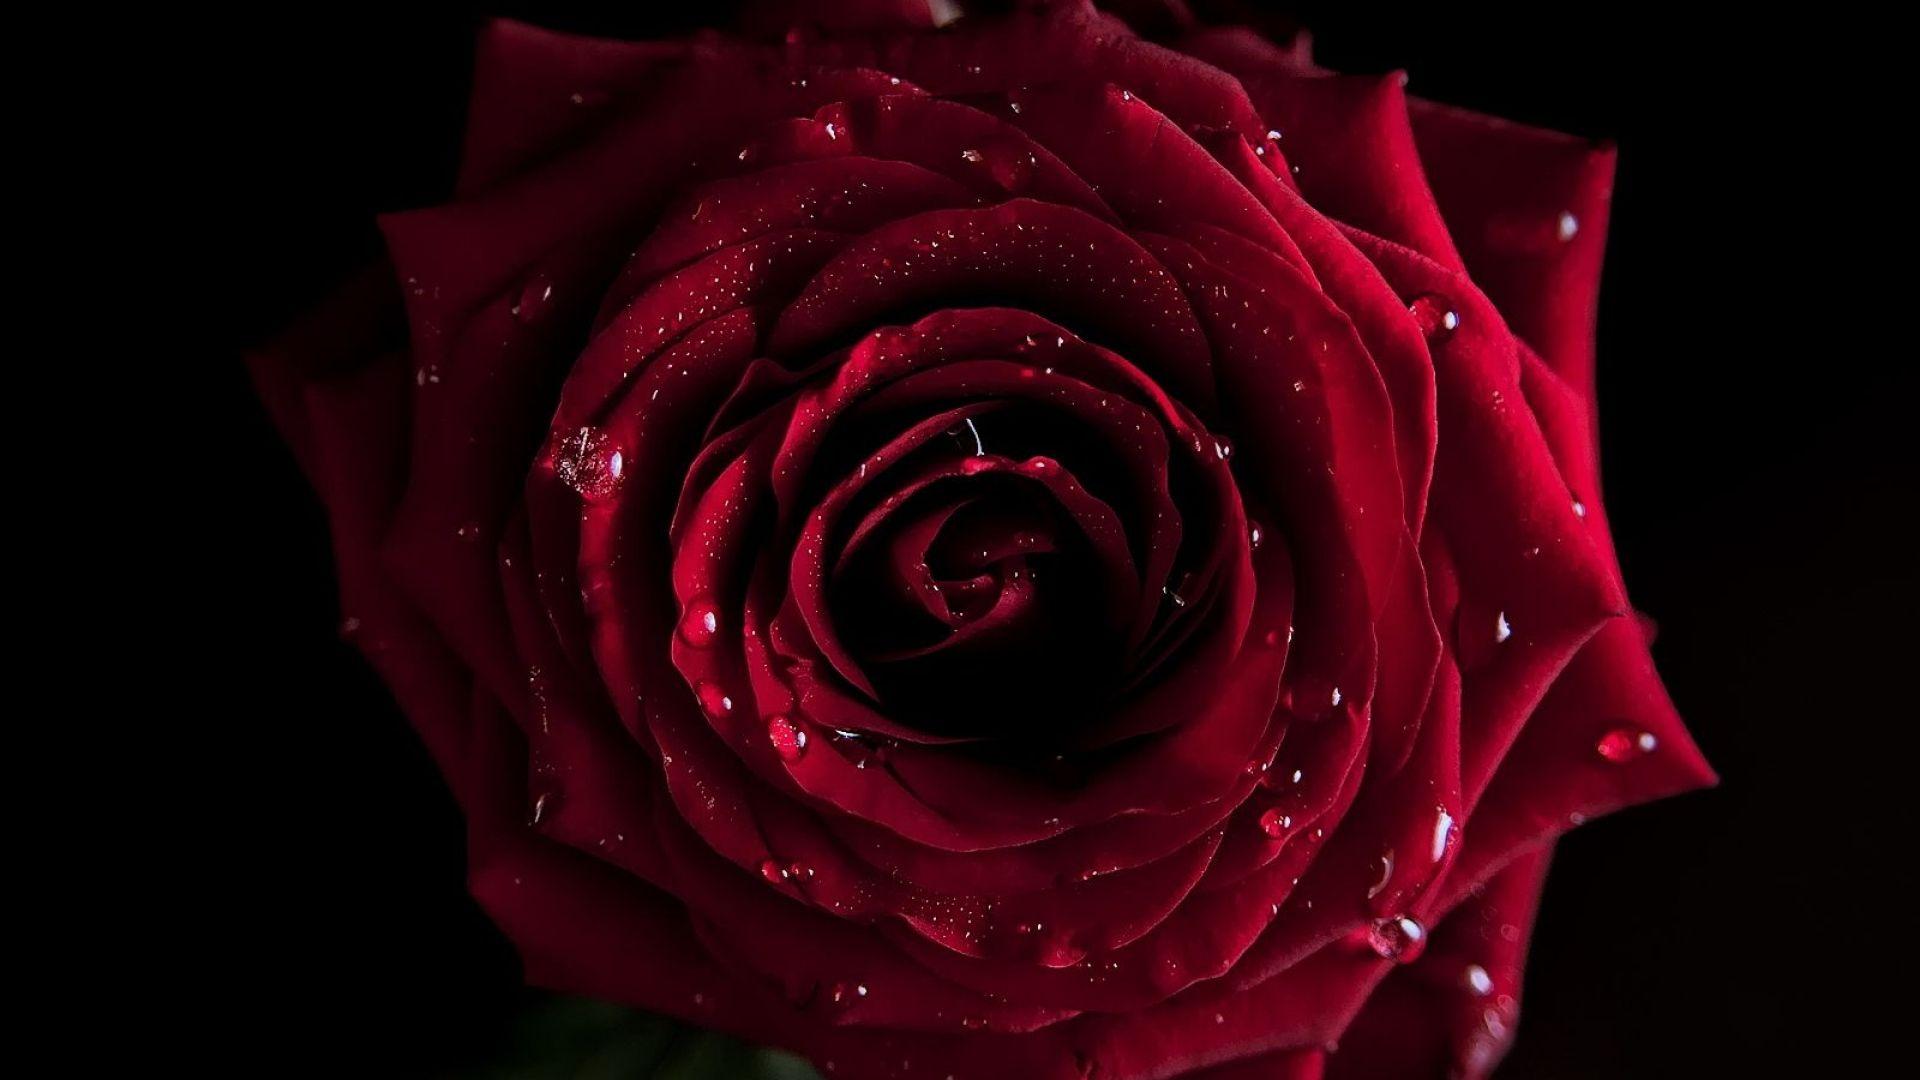 Dark Red Rose Wallpaper Android Perfect Wallpaper Background